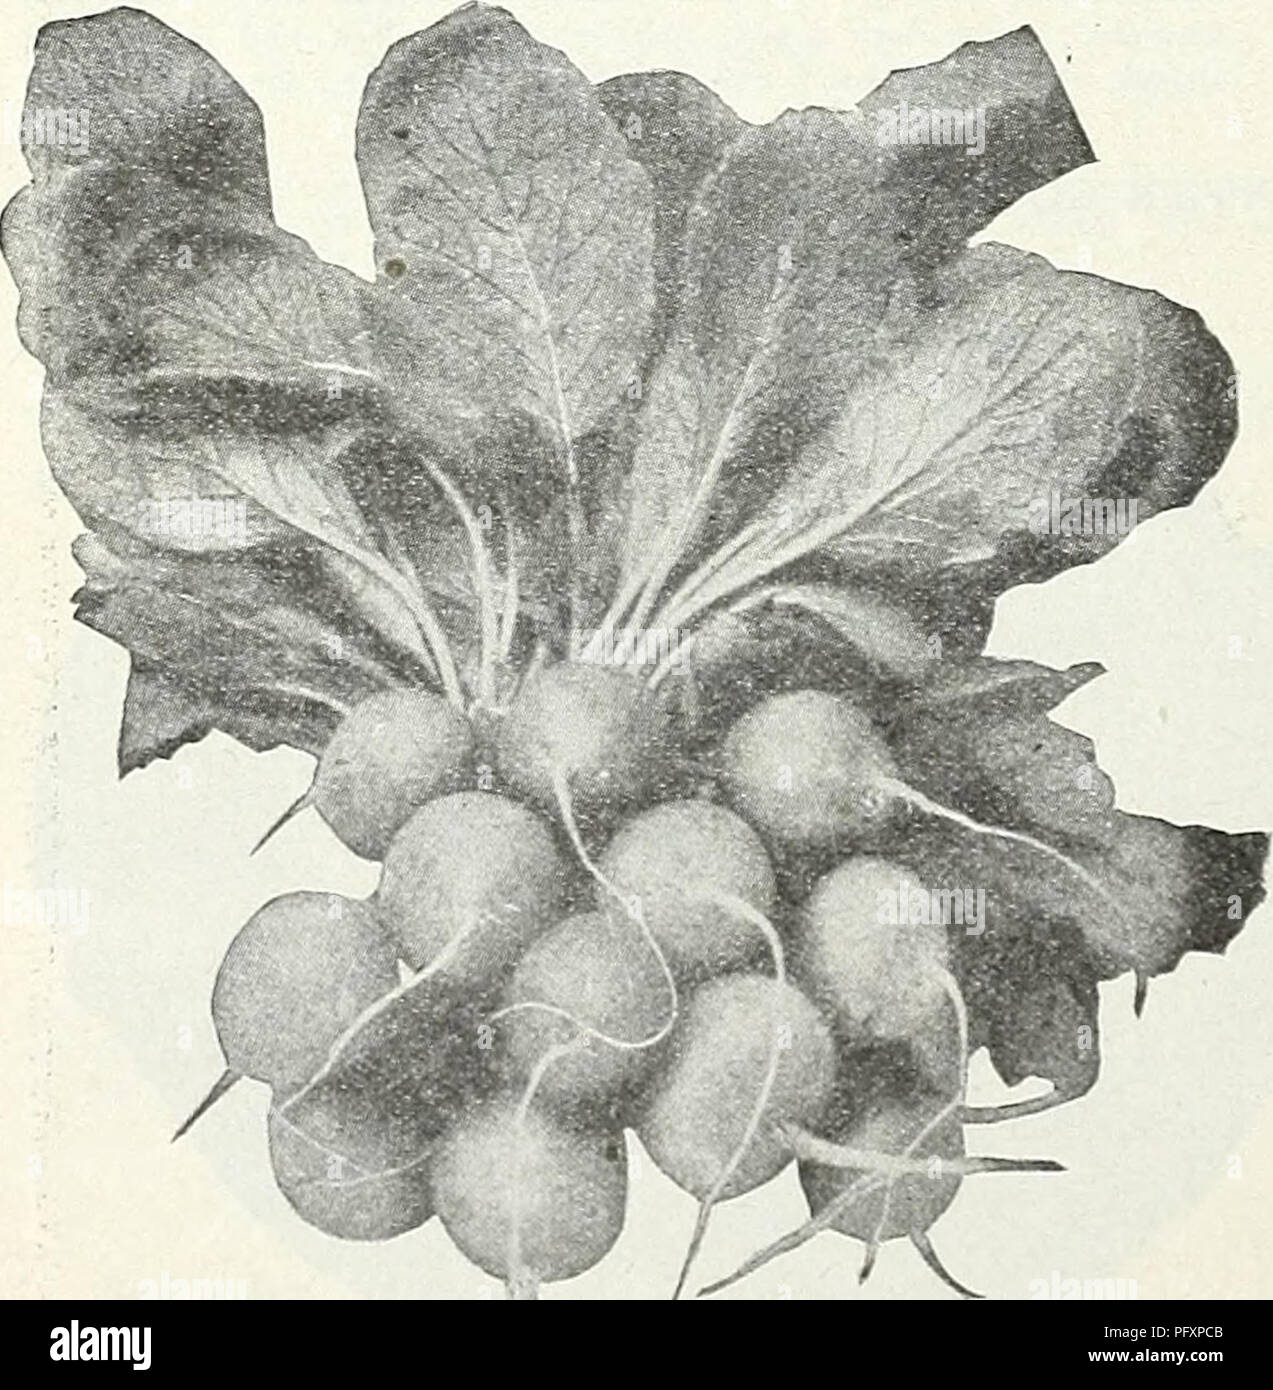 . Currie's garden annual : spring 1931 56th year. Flowers Seeds Catalogs; Bulbs (Plants) Seeds Catalogs; Vegetables Seeds Catalogs; Nurseries (Horticulture) Catalogs; Plants, Ornamental Catalogs; Gardening Equipment and supplies Catalogs. RADISH Scarlet Globe Radish CRIMSON GIANT—Grows rapidly to a very large size and is very attractive in ap- pearance. The skin is bright crimson, flesh white and tender, with no tendency to become pithy or hollow. Pkt., lOc; oz., 15c; % lb., 40c; 1 lb., 85c. WHITE TIPPED SCARLET TURNIP (Rosy Gem)—A popular early variety. Pkt., 10c; oz., 15c; J4 lb., 35c; 1 lb. Stock Photo